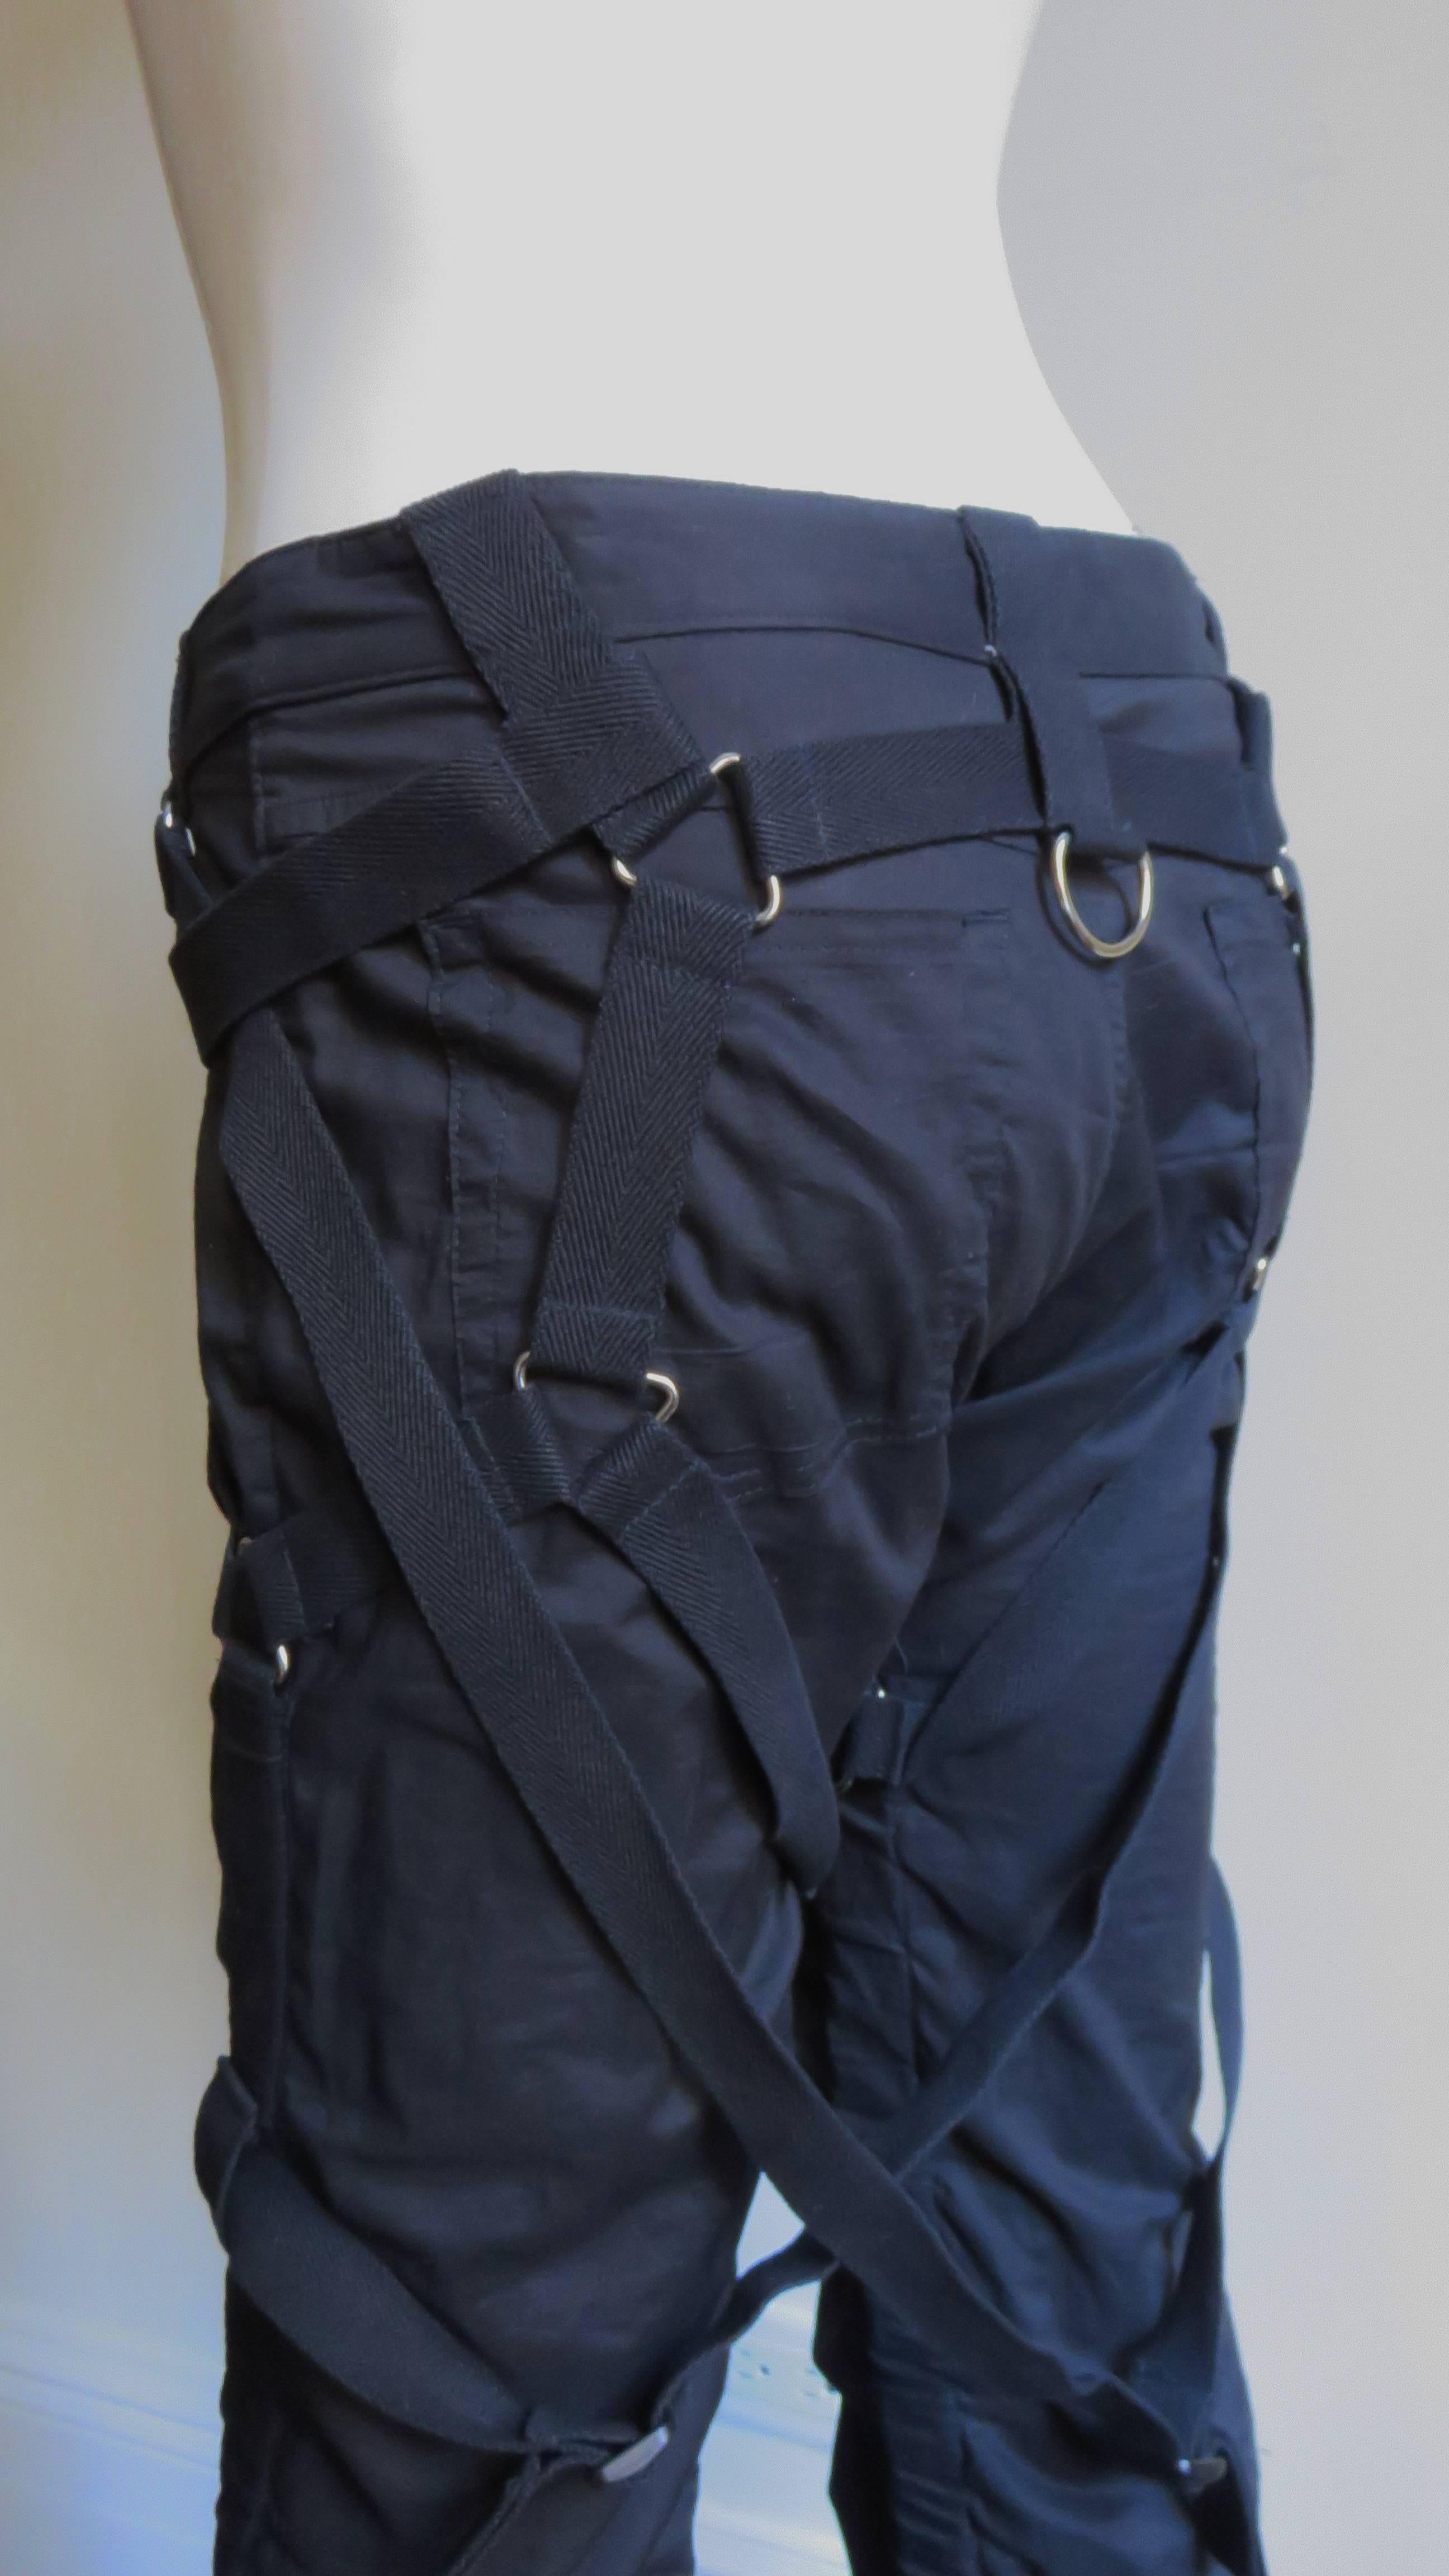 Comme des Garcons AD 2002 Pants with Straps In Good Condition For Sale In Water Mill, NY